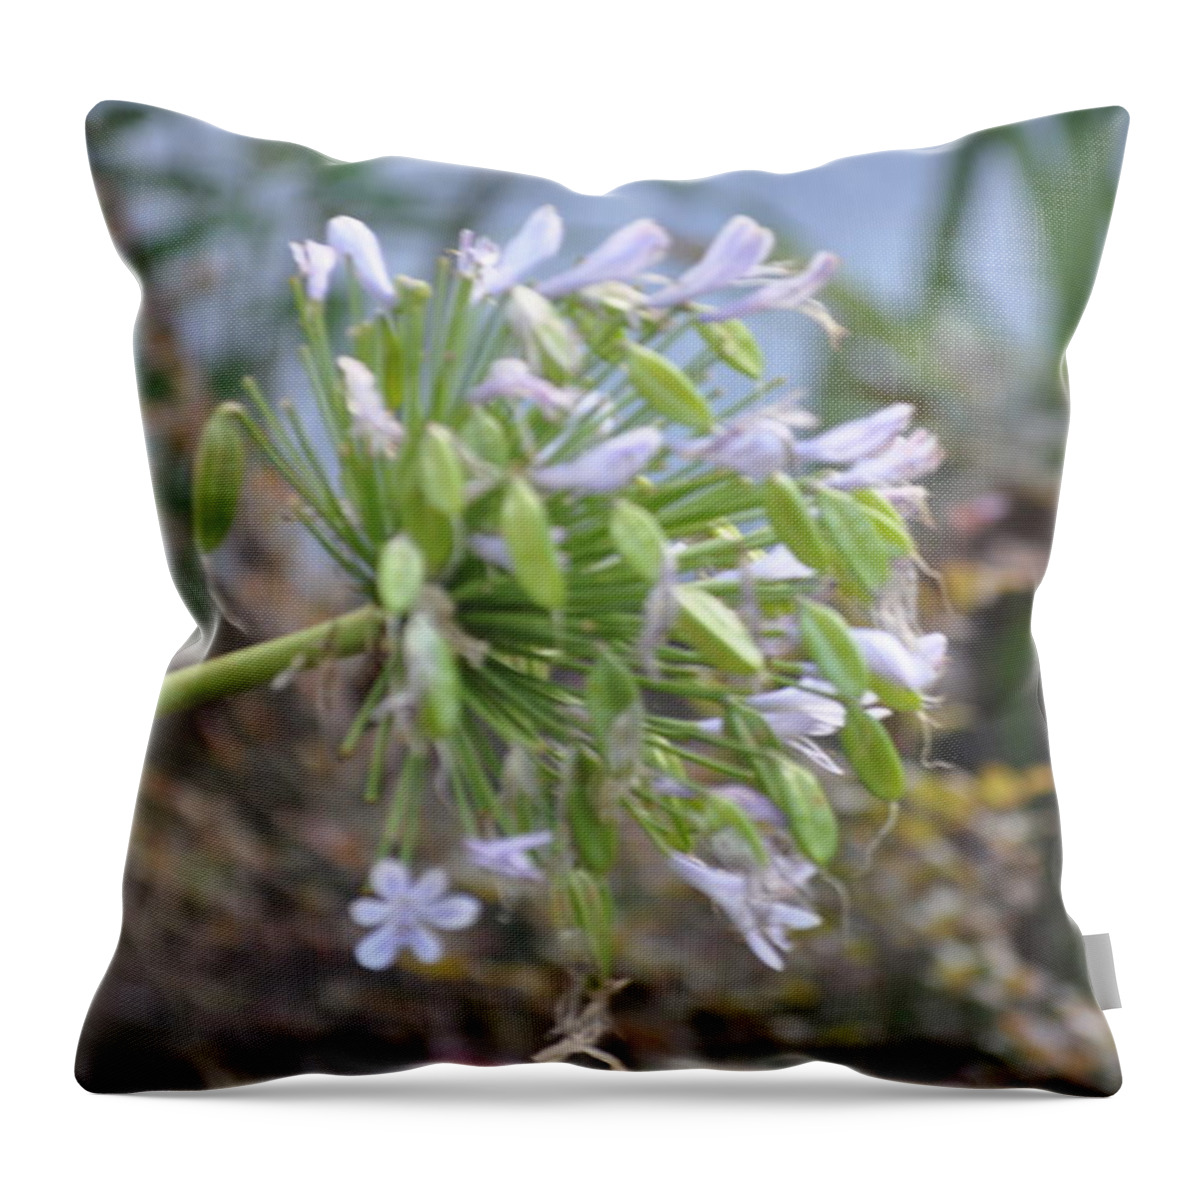 Purple Flower Throw Pillow featuring the photograph Gretchen's Images by Gretchen Byars